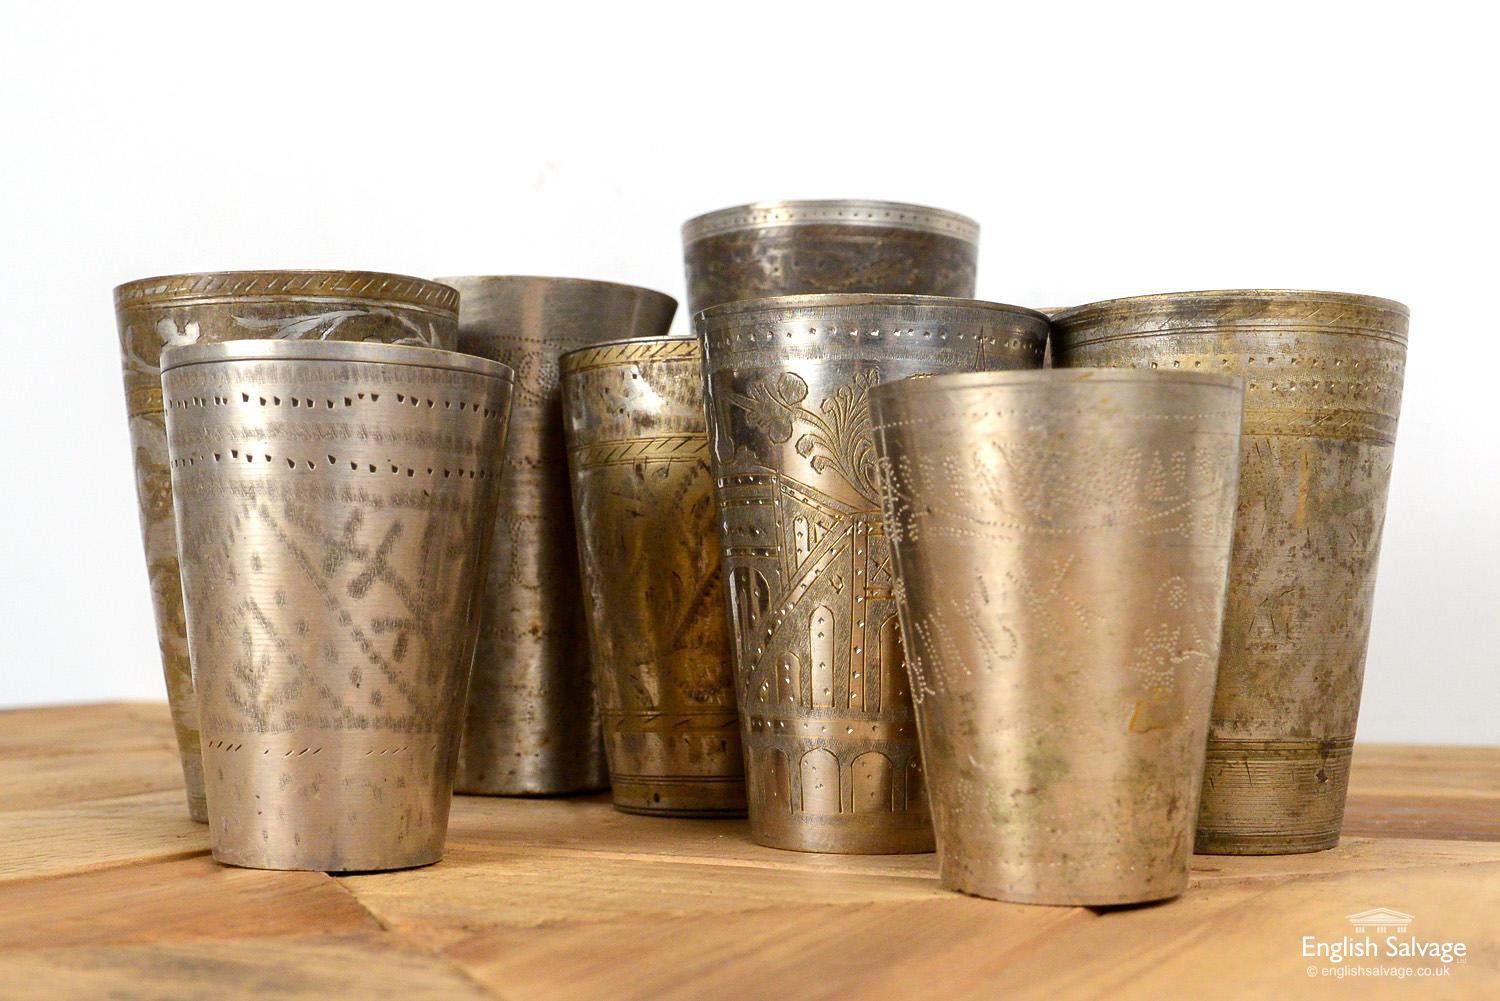 Reclaimed brass lassi cups with intricate decoration, each cup is unique. Lassi is an Indian yoghurt based drink. Details of cups available below (sizes of small and medium cups varies between dimensions stated). Wear to all from past use.